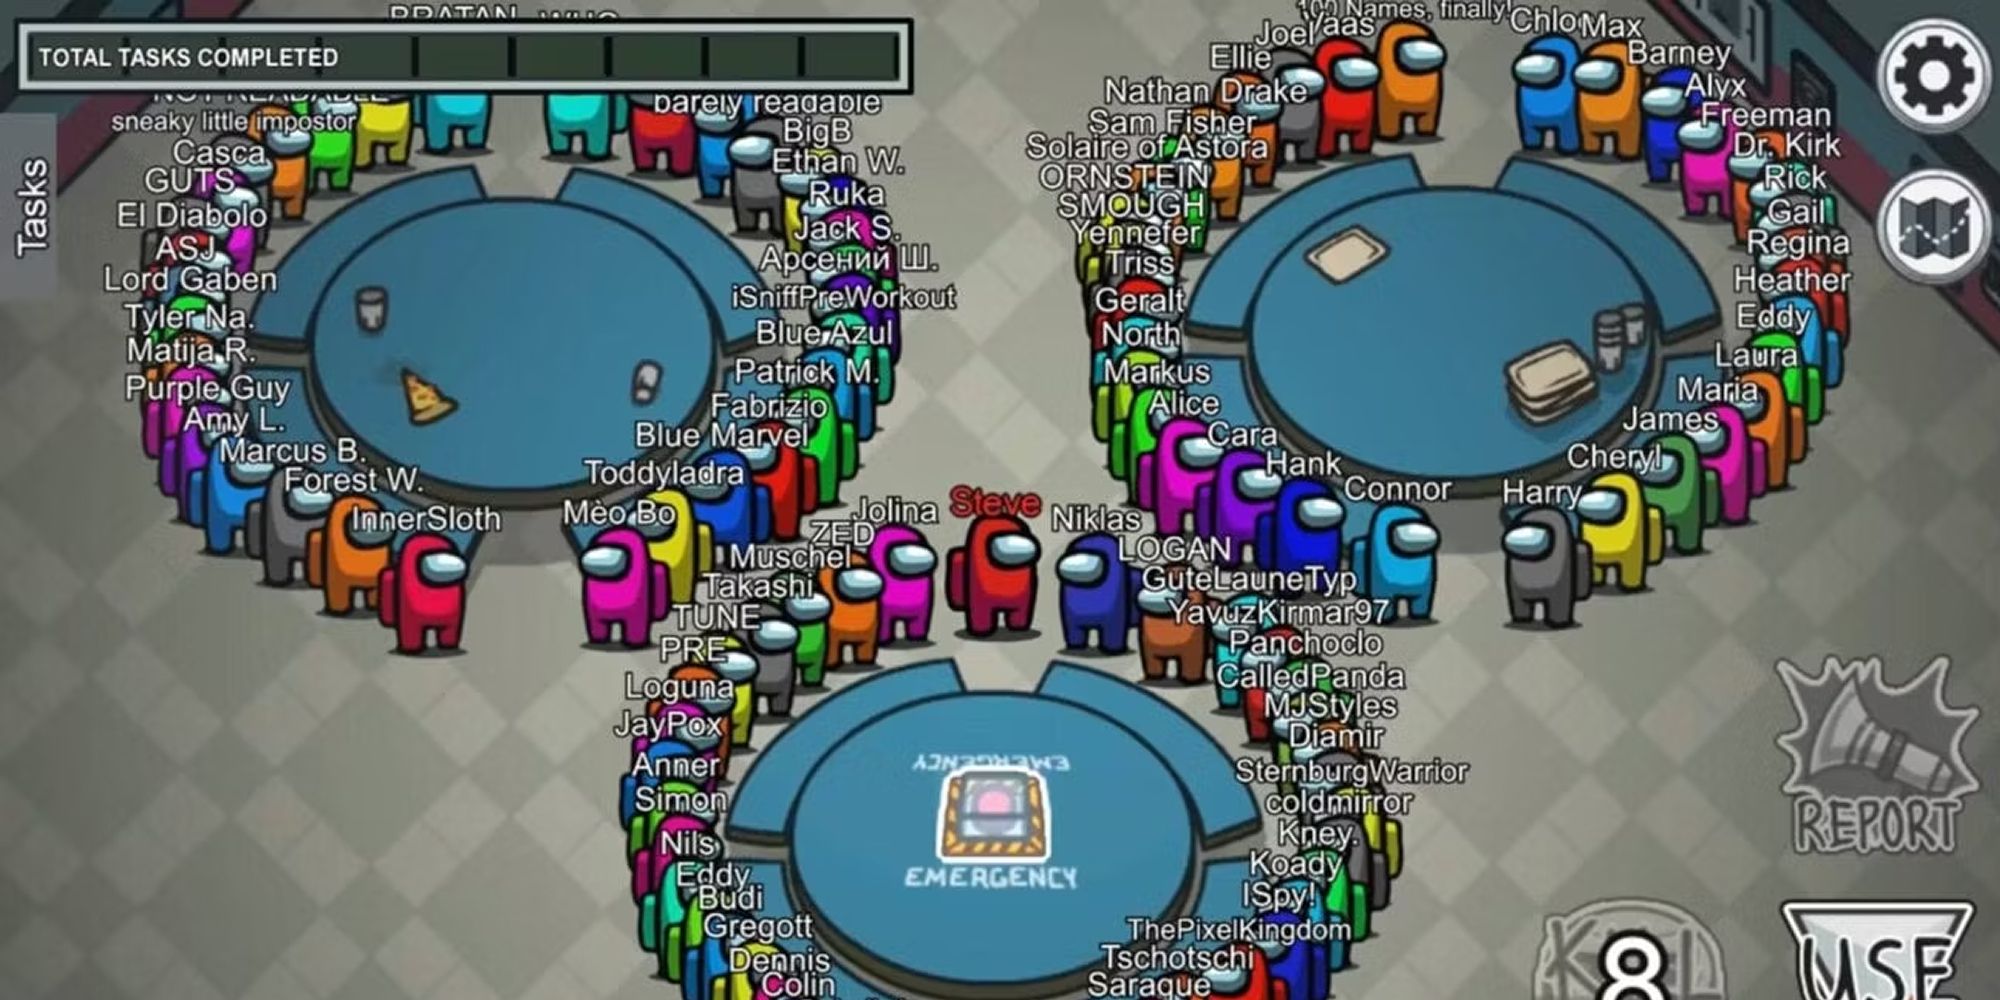 100 Players Mod With All The Players Gathered Around Tables